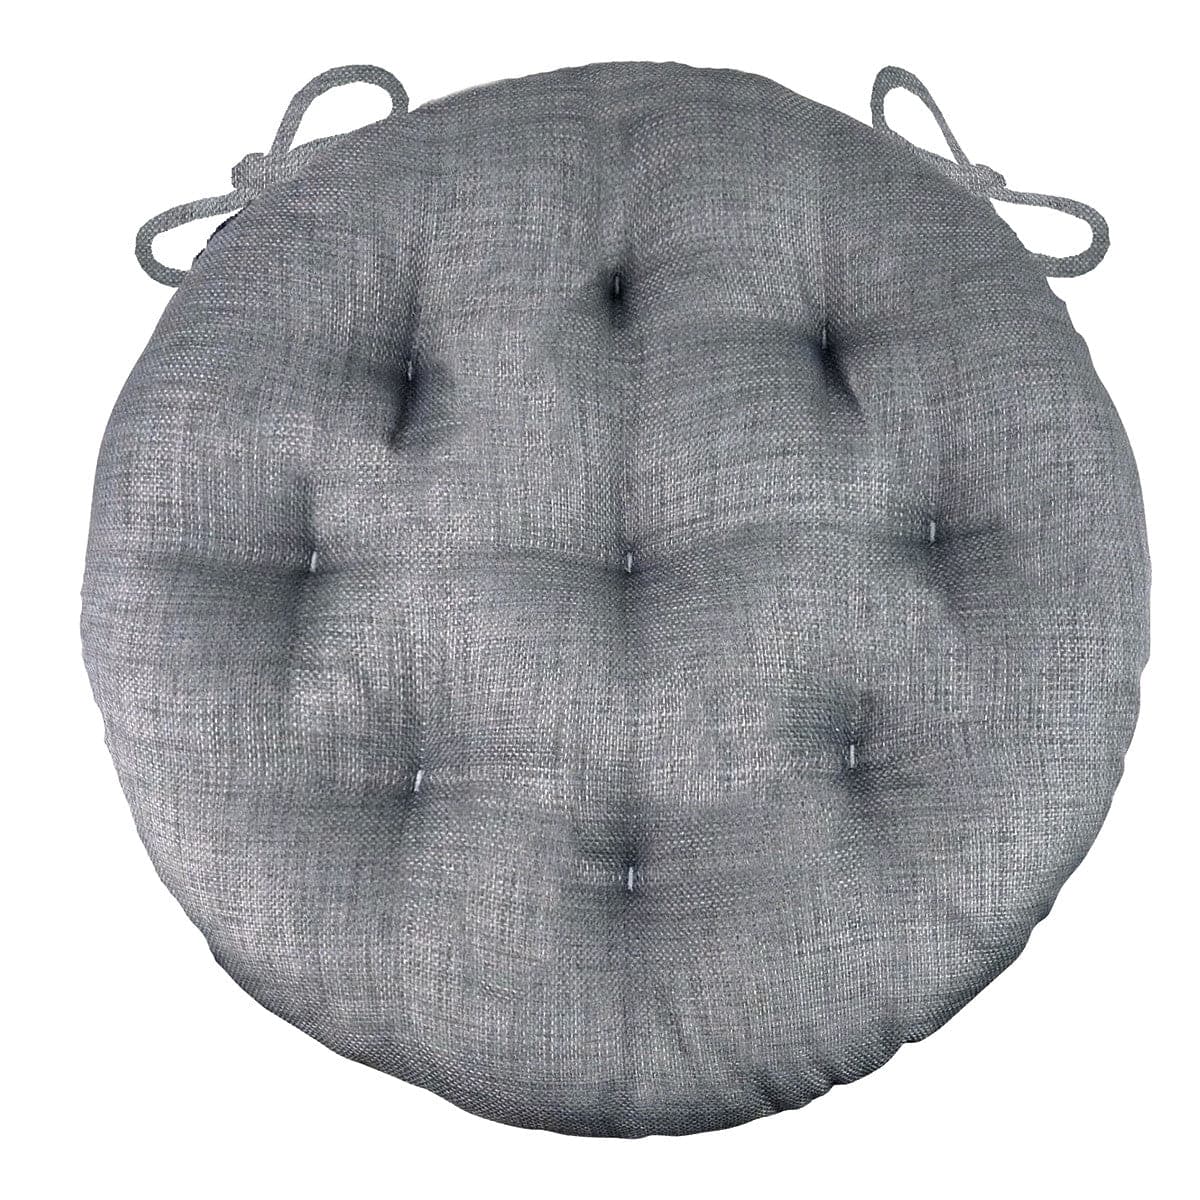 Round Garden Chair Pads Seat Cushion for Outdoor Bistros Stool Patio Dining Room Comfy Life Foot Rest, Size: 30x30cm, Gray